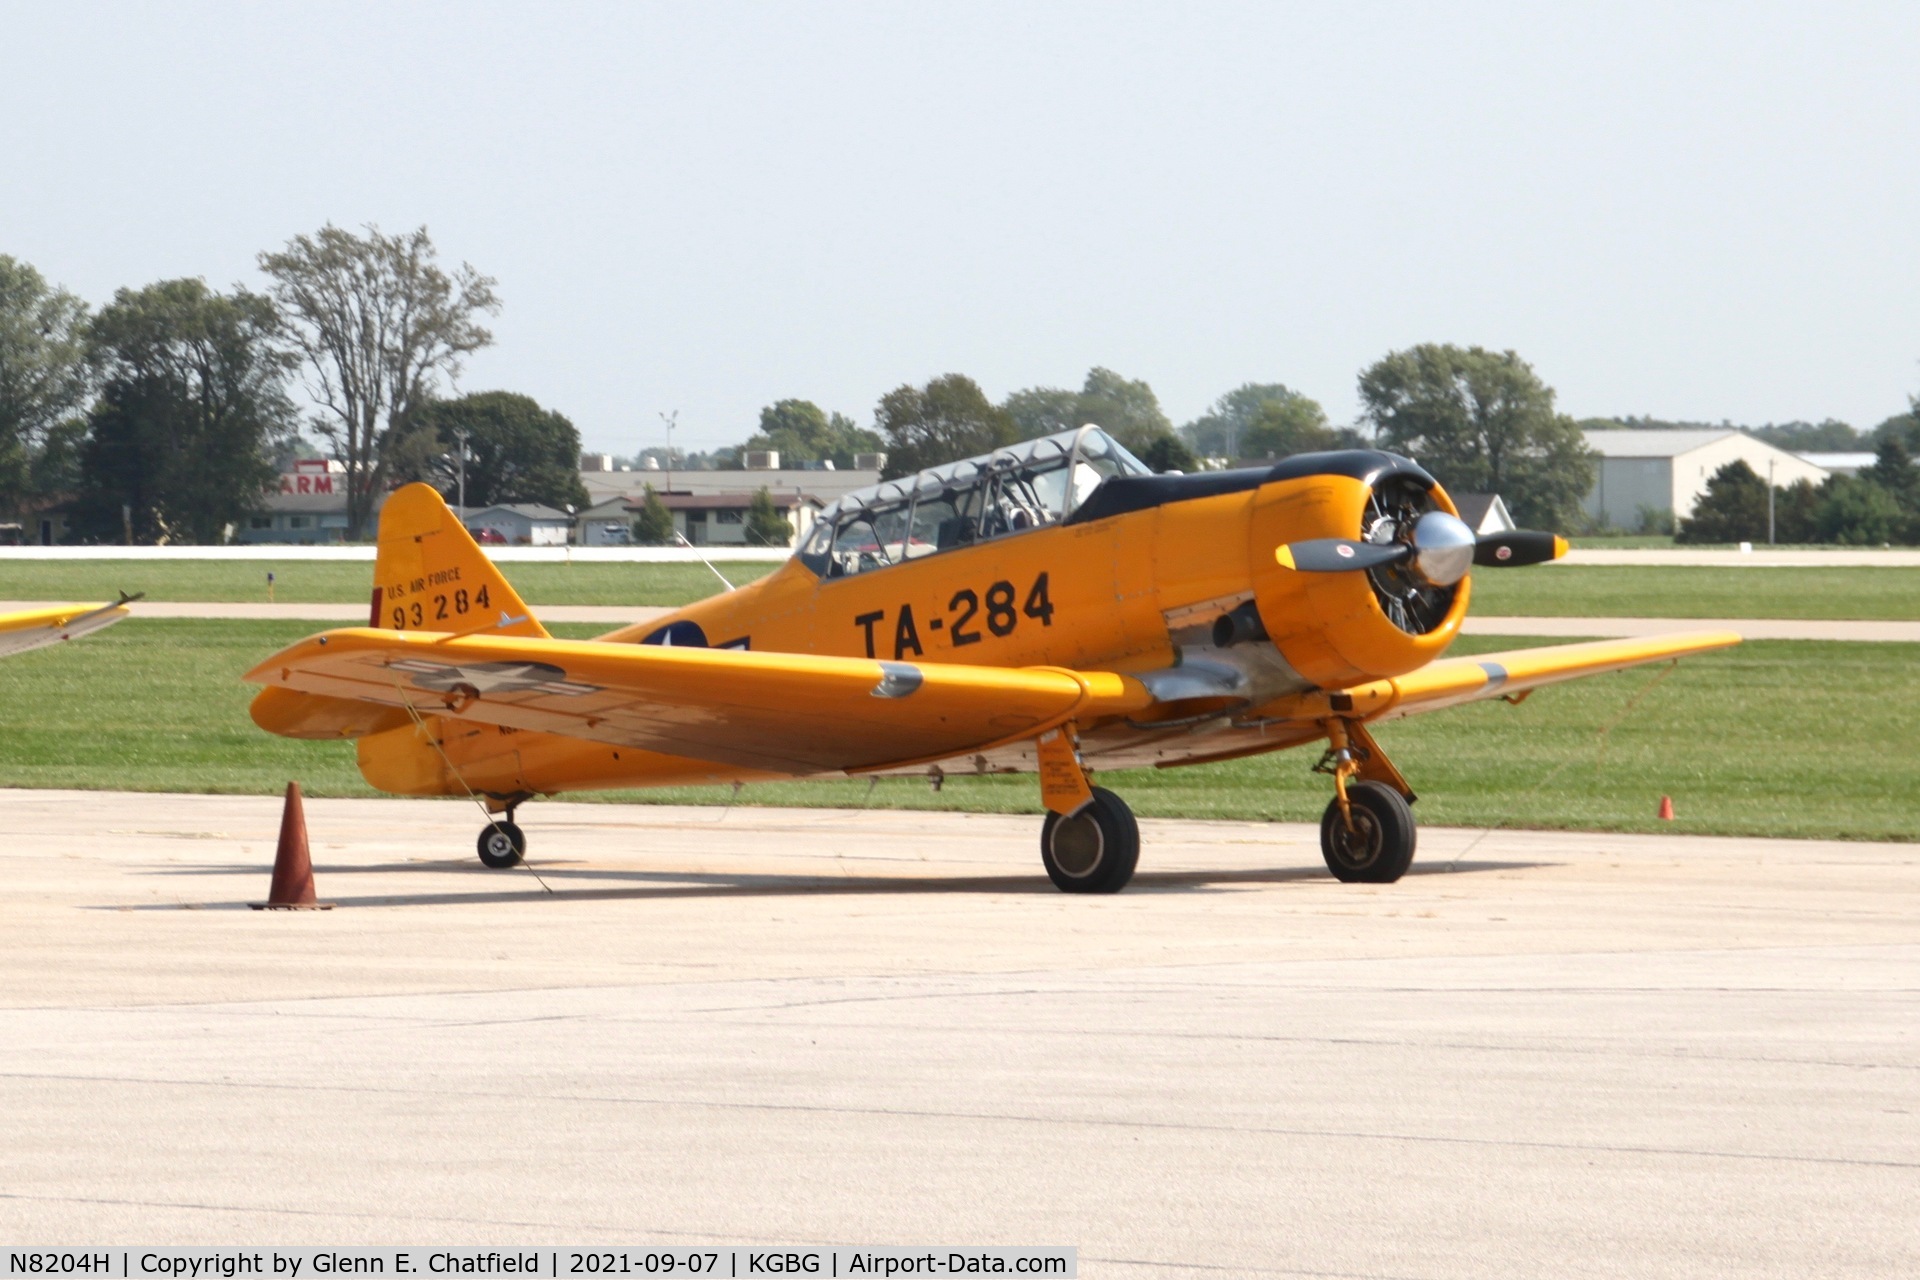 N8204H, 1951 North American T-6G Texan C/N 168-388, At the Stearman Fly In